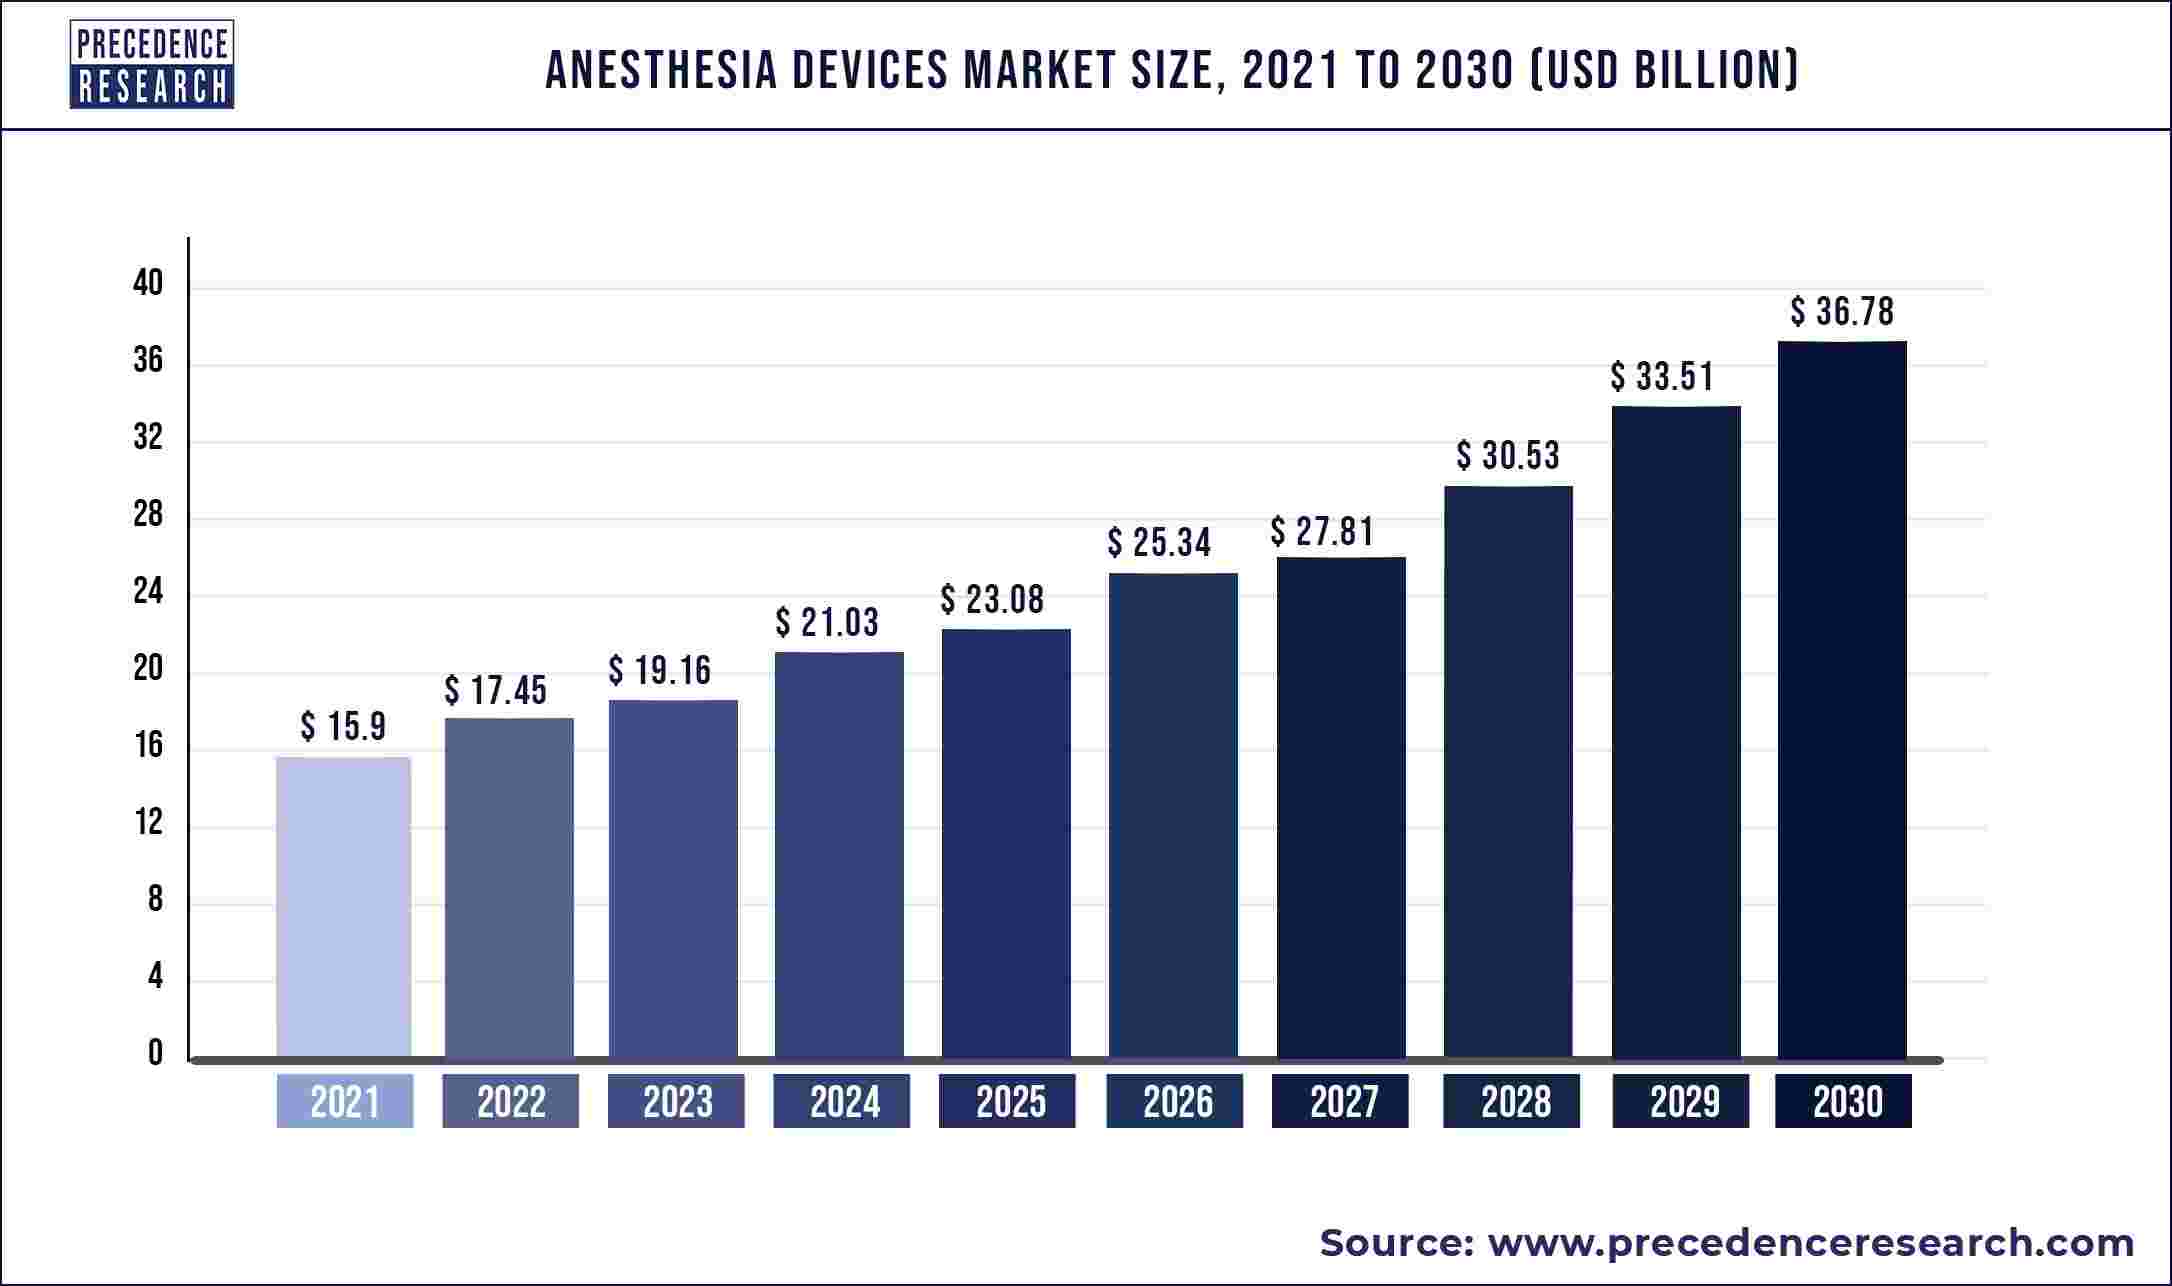 Anesthesia Devices Market Size to Exceed US$ 36.78 Billion by 2030 | Says Precedence Research